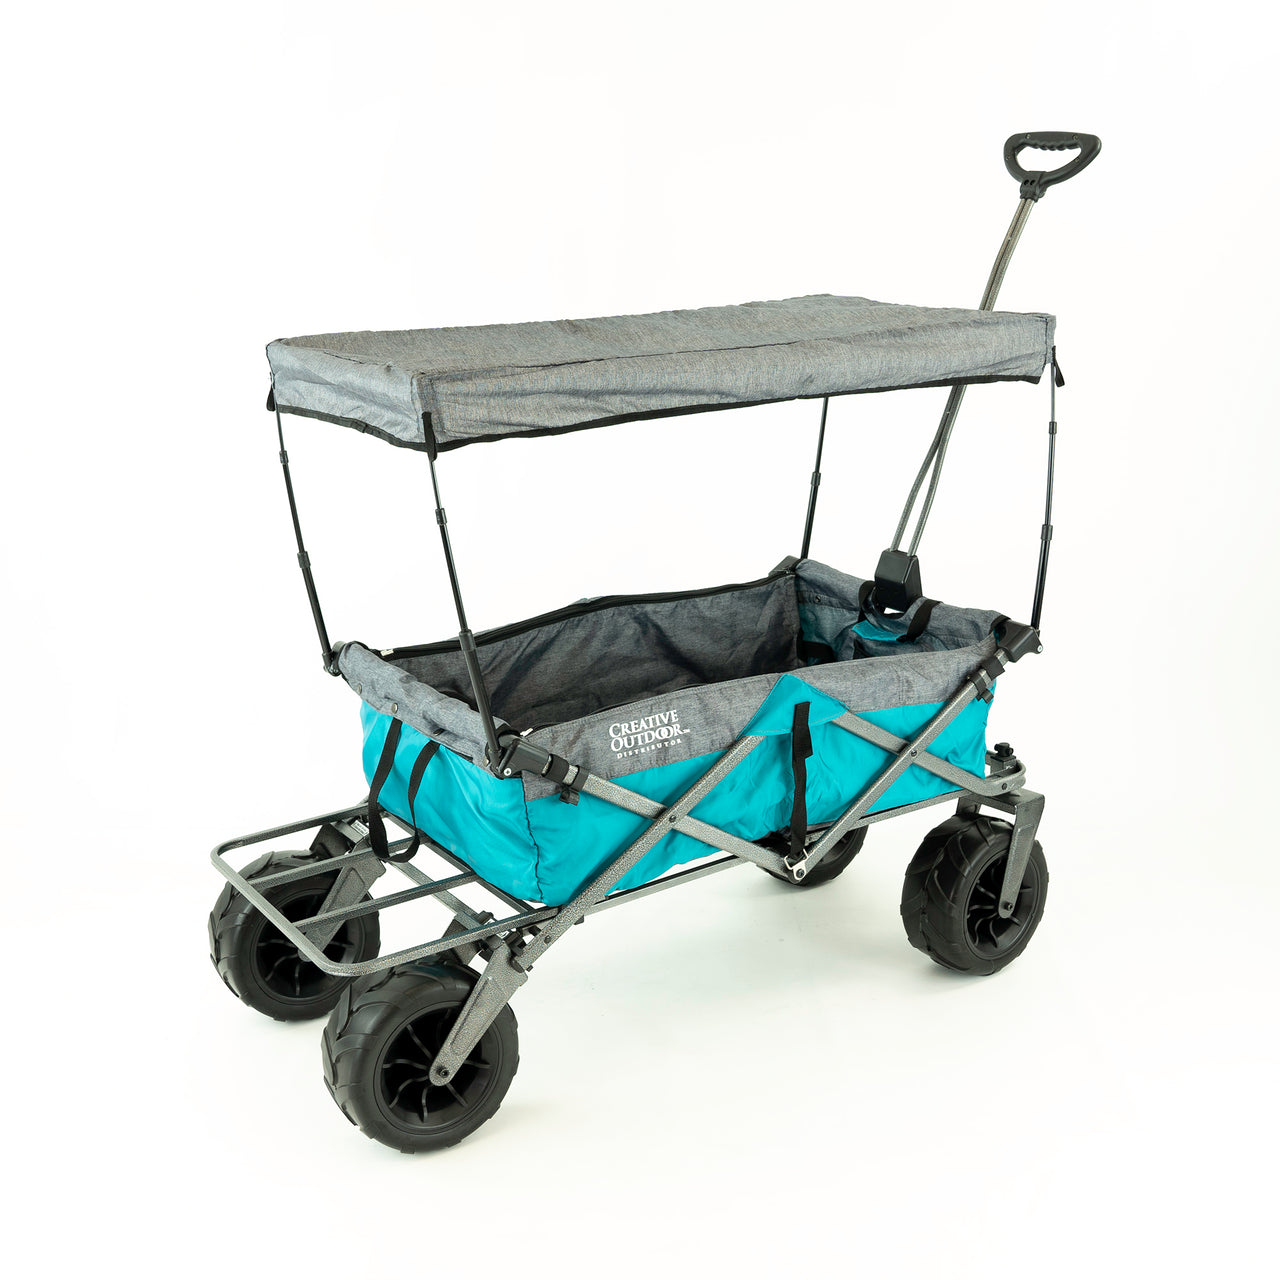 XXL Hauler Deluxe with Cooler Rack | Teal Gray - Custom Folding Wagons